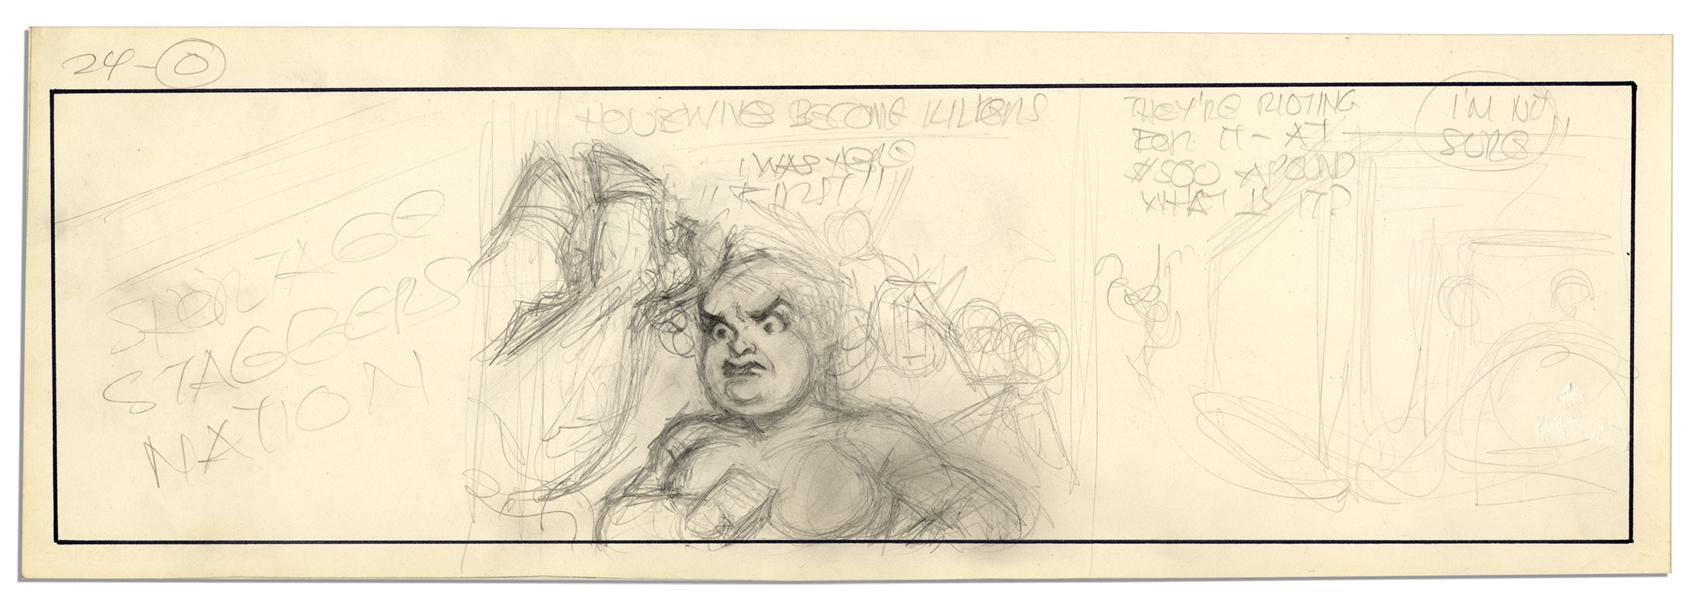 Unfinished Comic Strip by Al Capp in Pencil -- Undated & Untitled Strip is Likely For ''Li'l Abner''  -- 18.5'' x 6.25'' -- Very Good -- From the Al Capp Estate